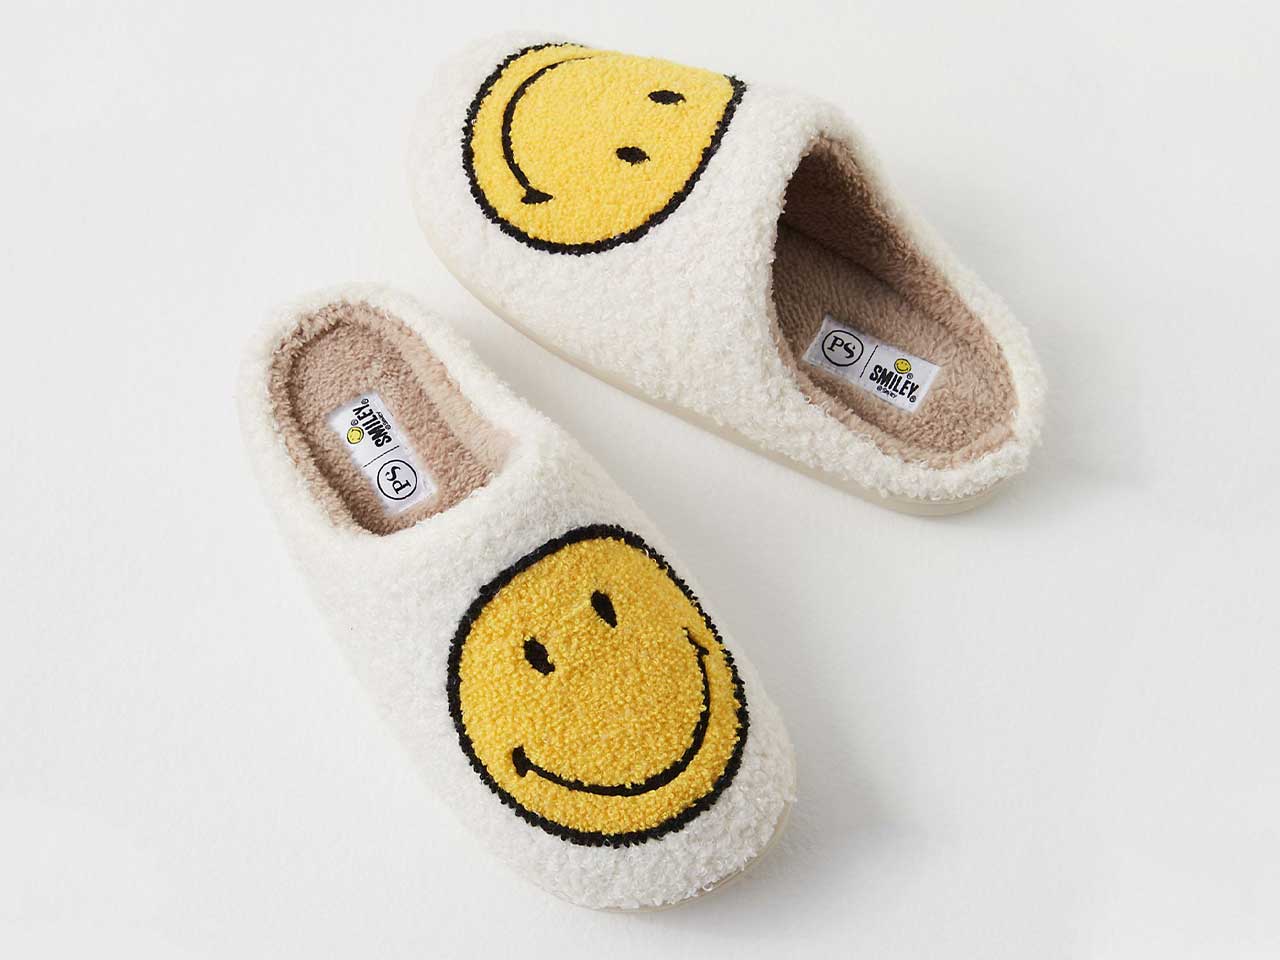 A pair of white slippers with yellow Smiley faces from Free People.